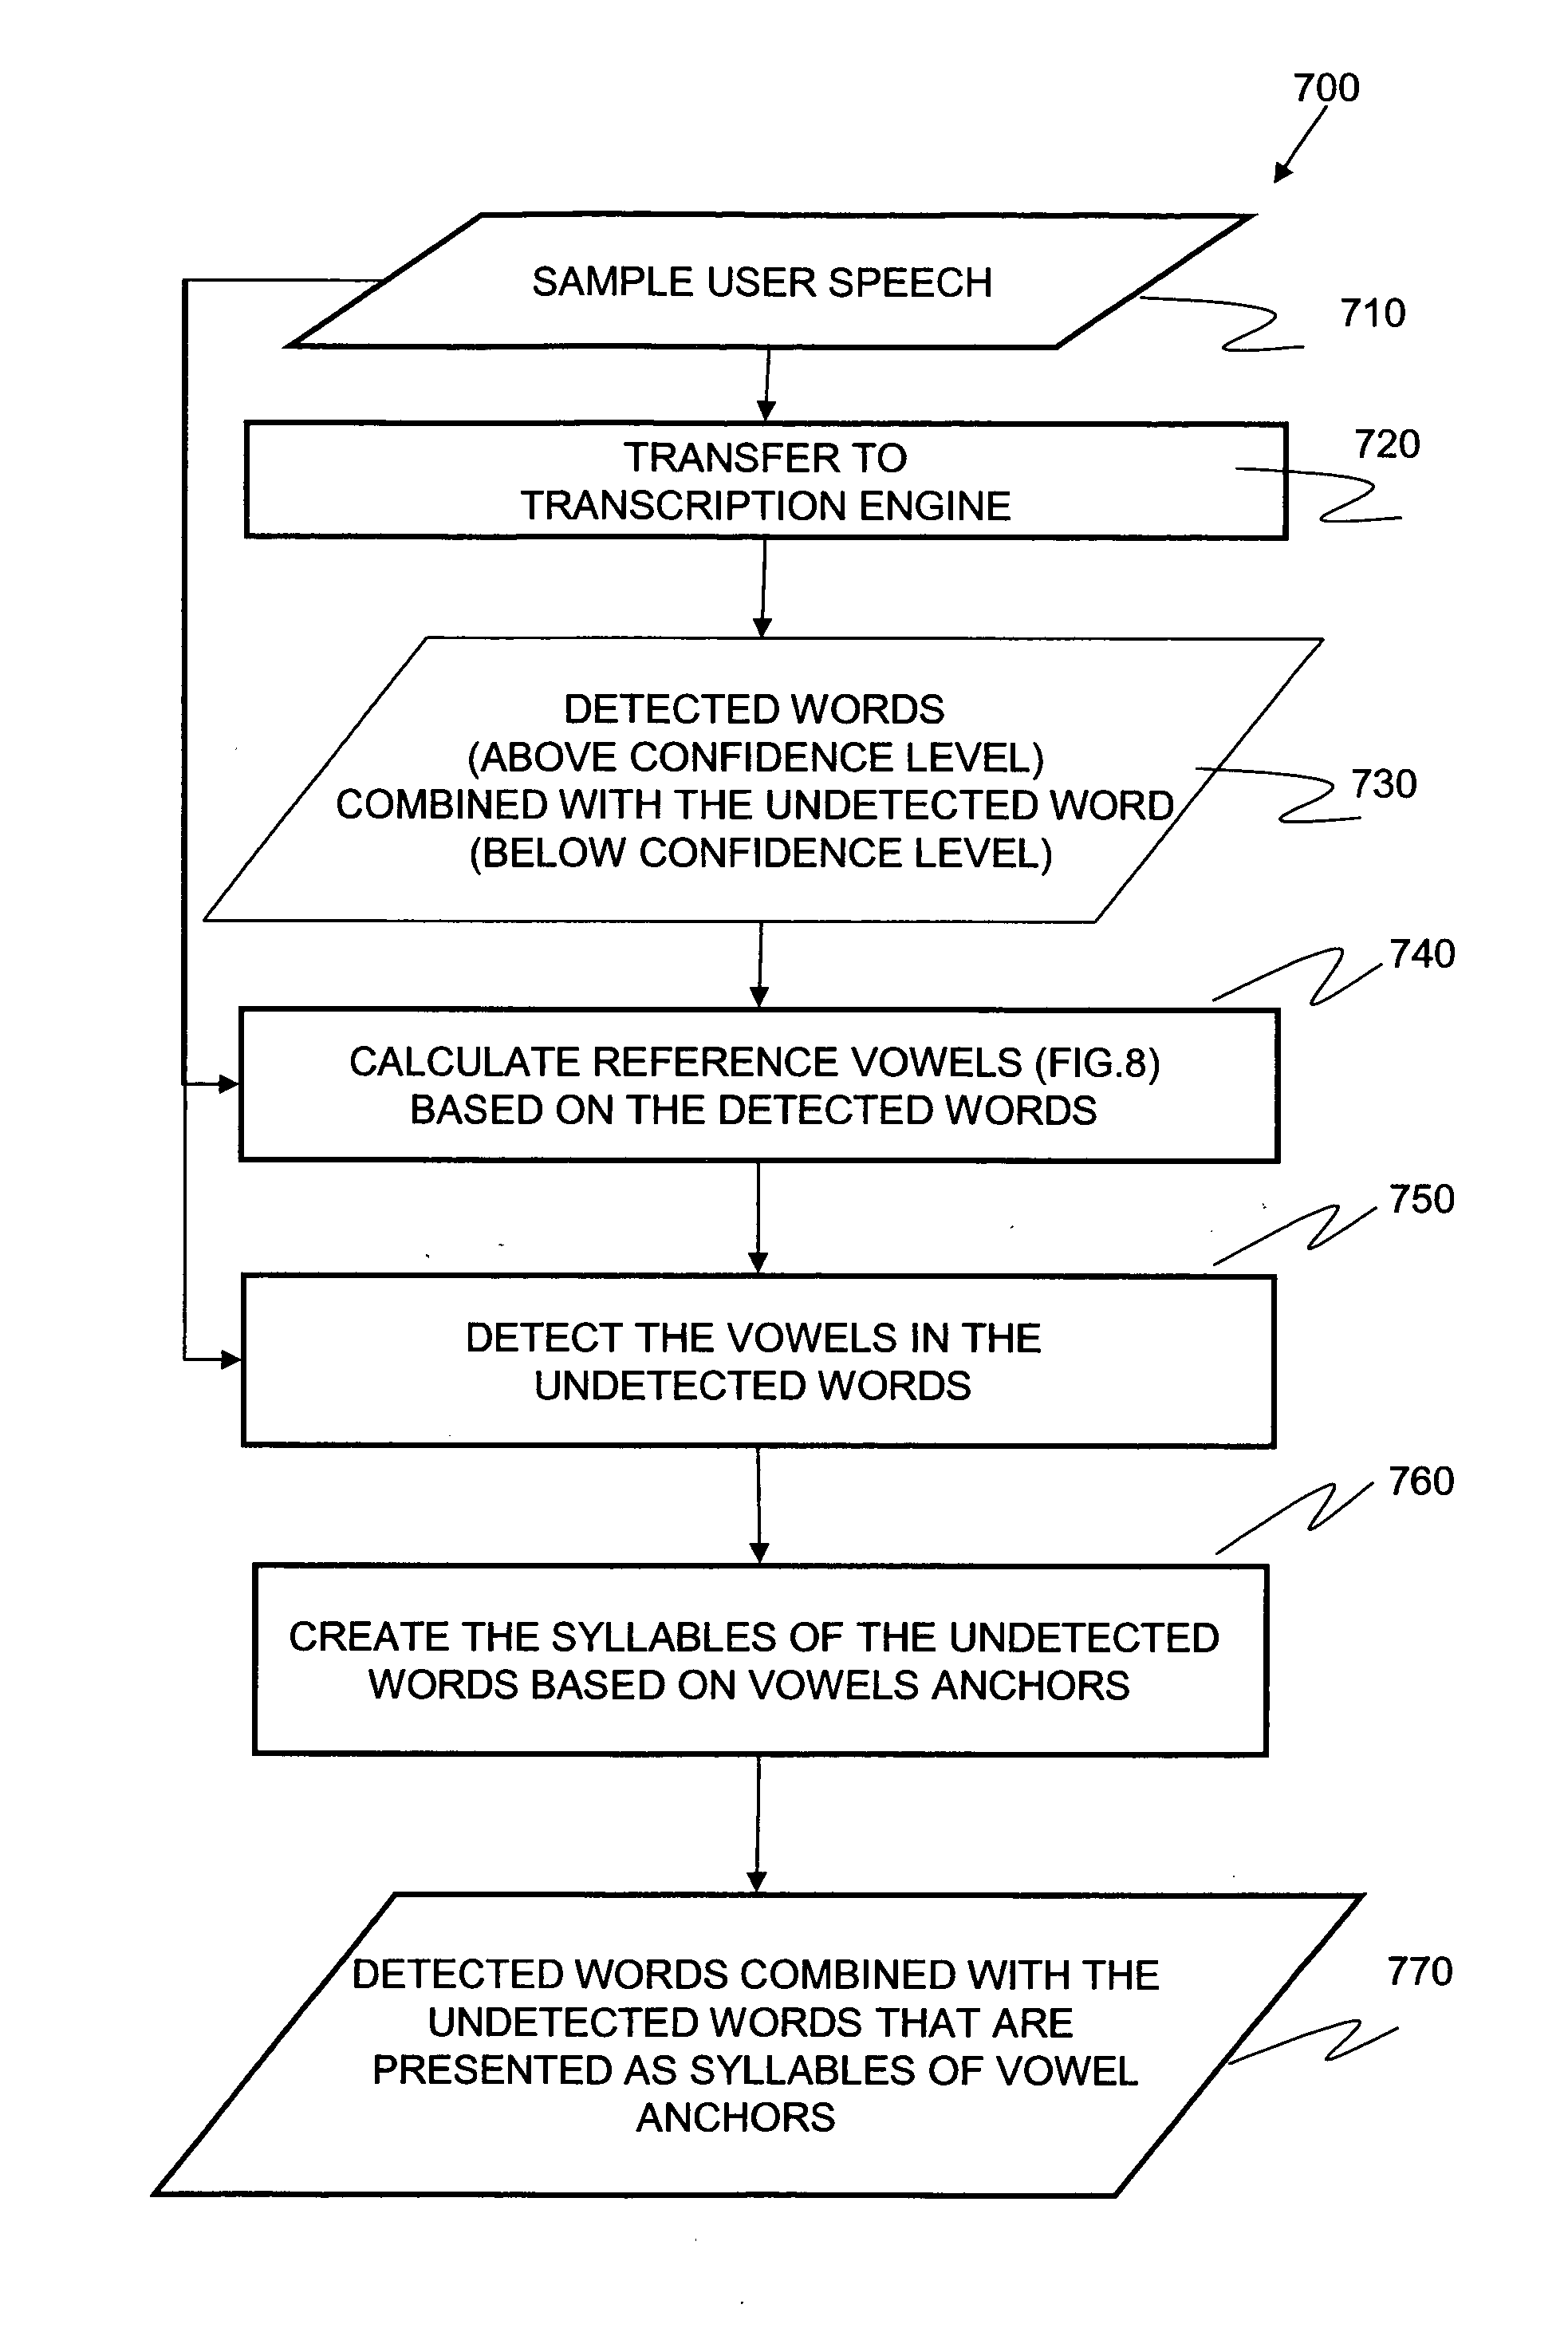 Vowel recognition system and method in speech to text applictions